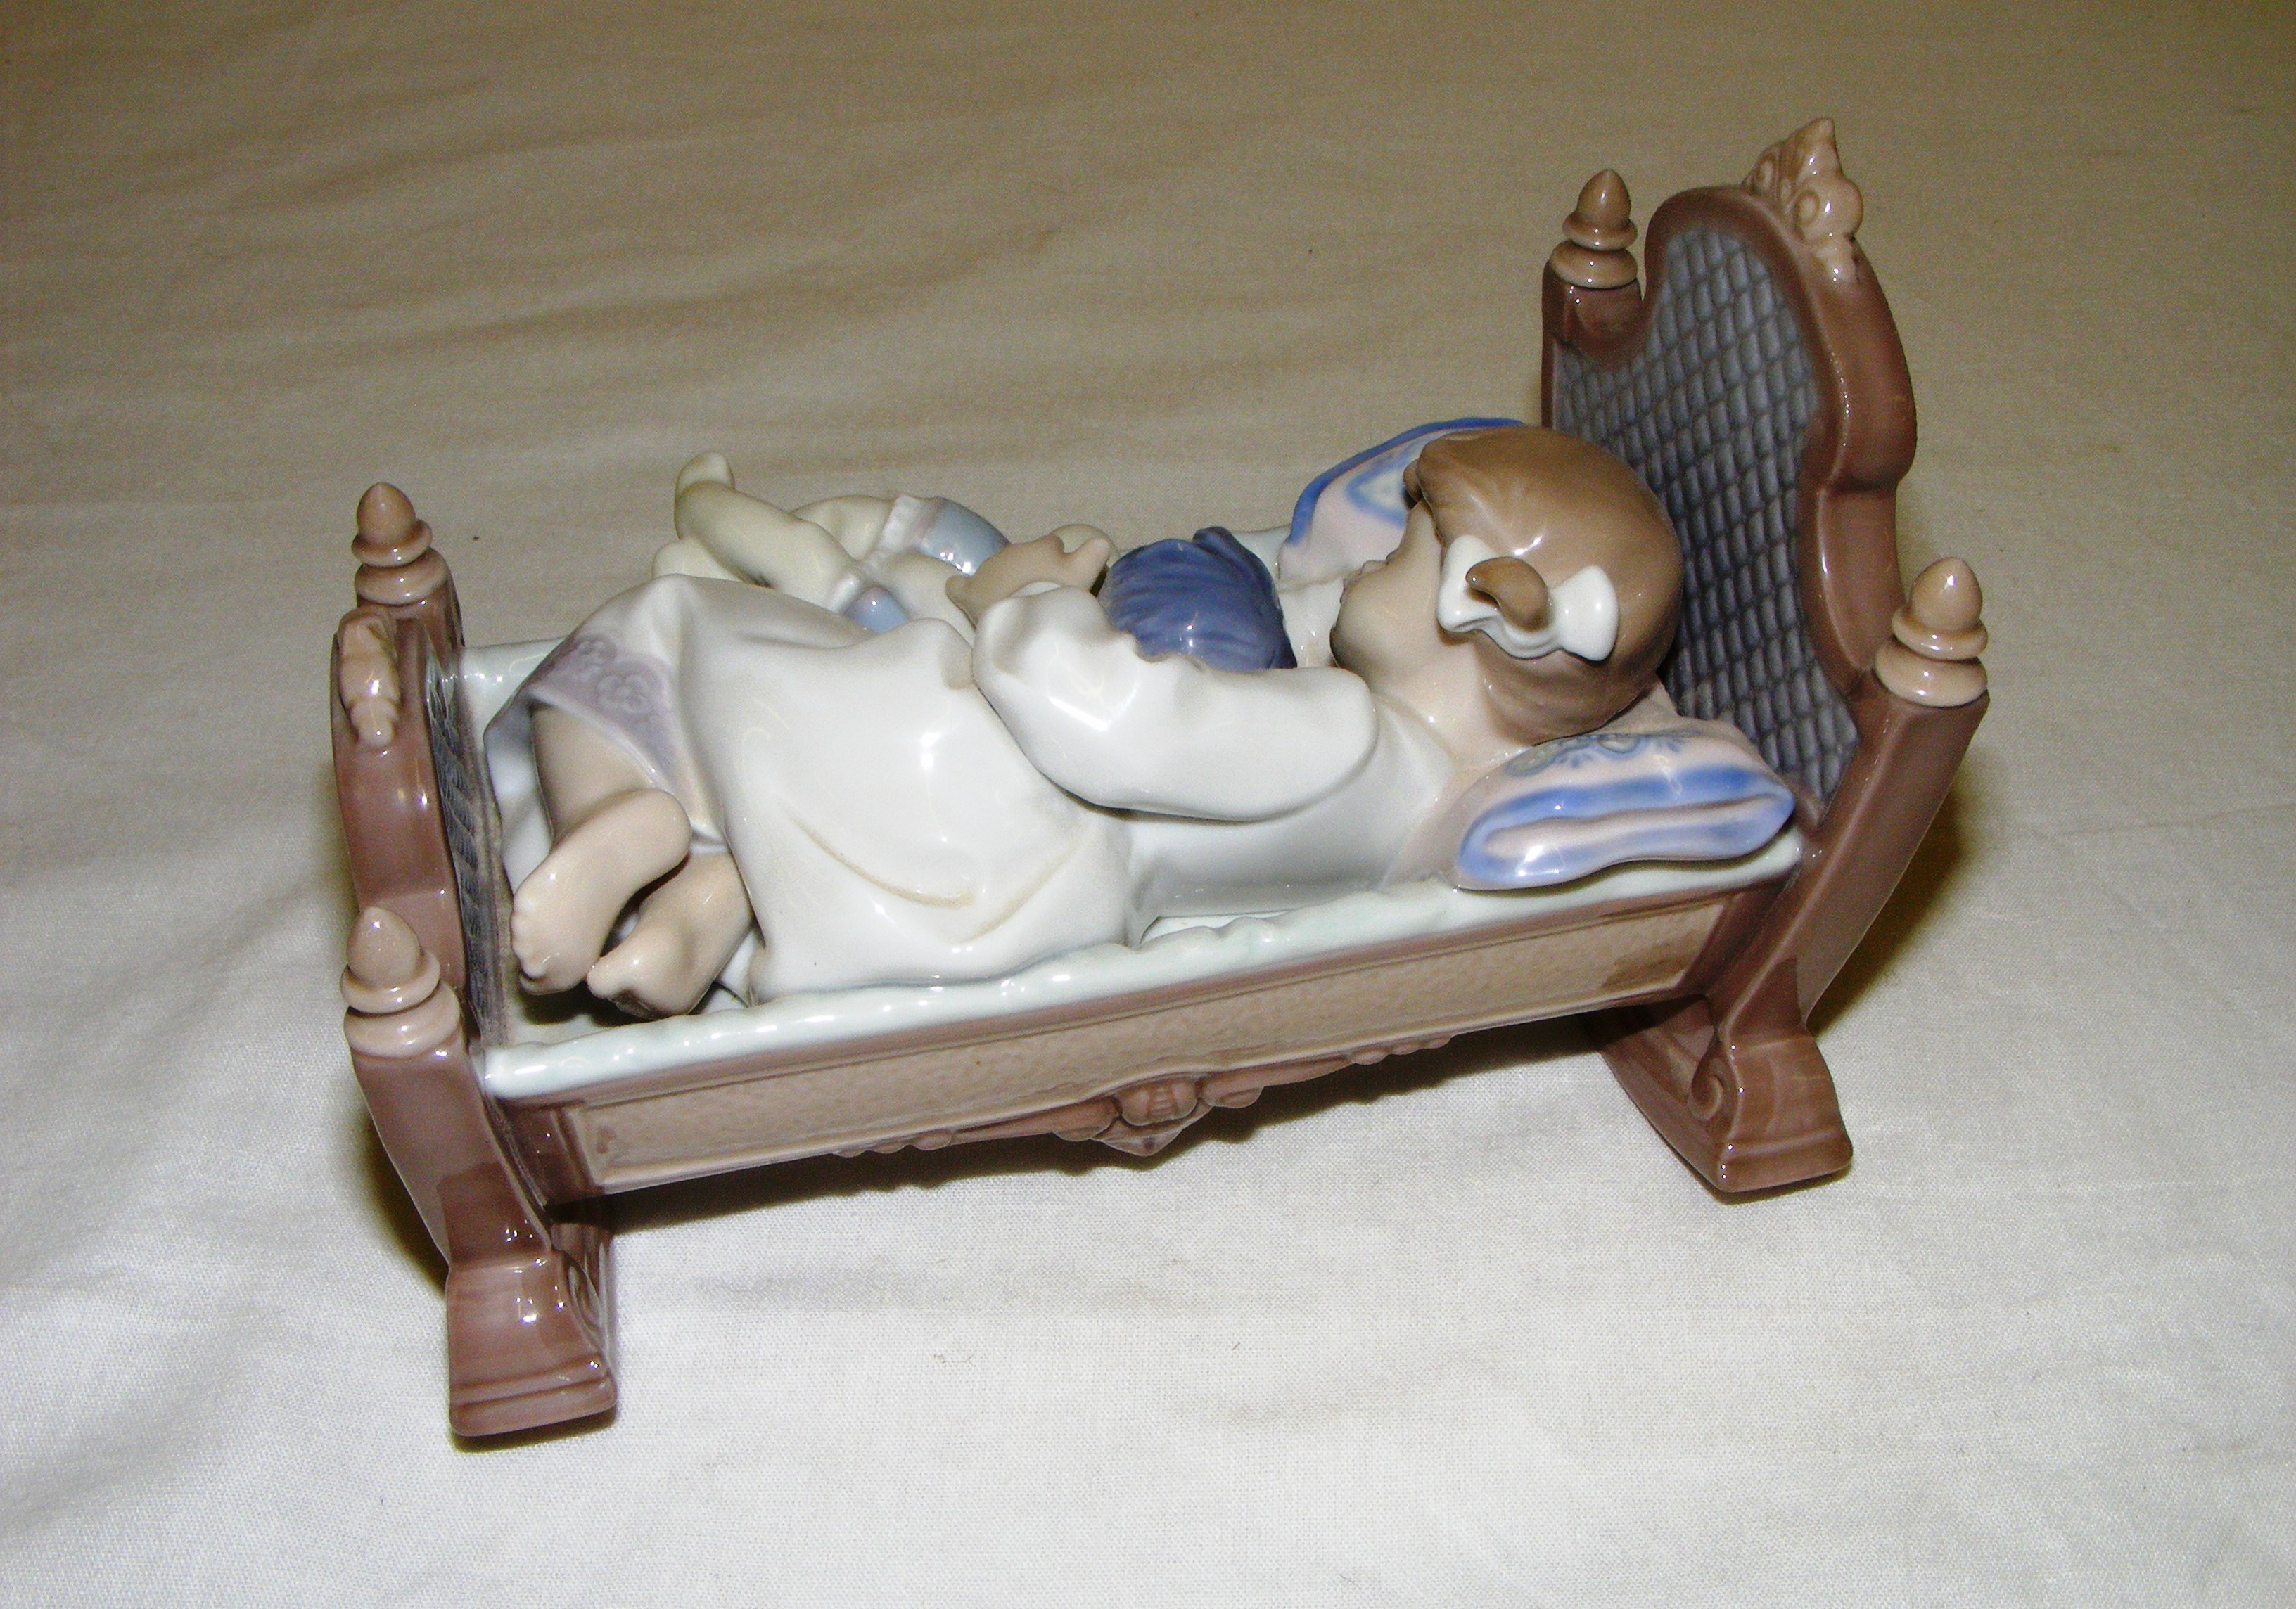 A Lladro figurine titled "Rock a bye baby", #5717, measuring 5" tall. Without original box. - Image 2 of 3